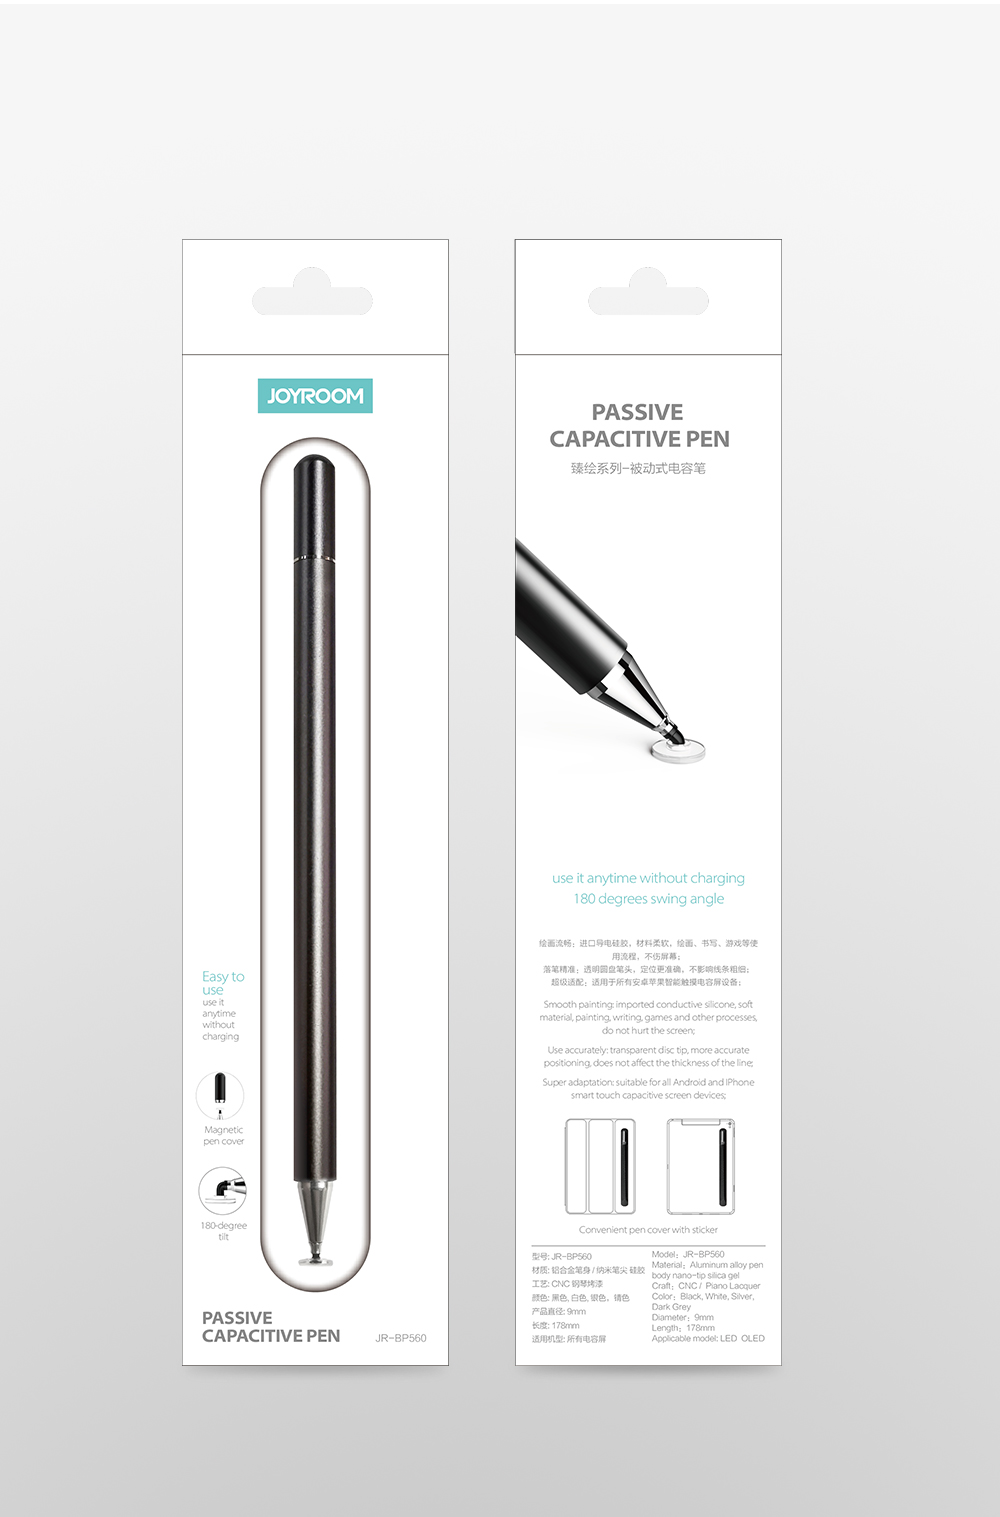 Joyroom-JR-BP560-Passive-Capacitive-Touch-Screen-Stylus-Pen-For-iOS-Android-Windows-Smart-Phone-Tabl-1591275-10